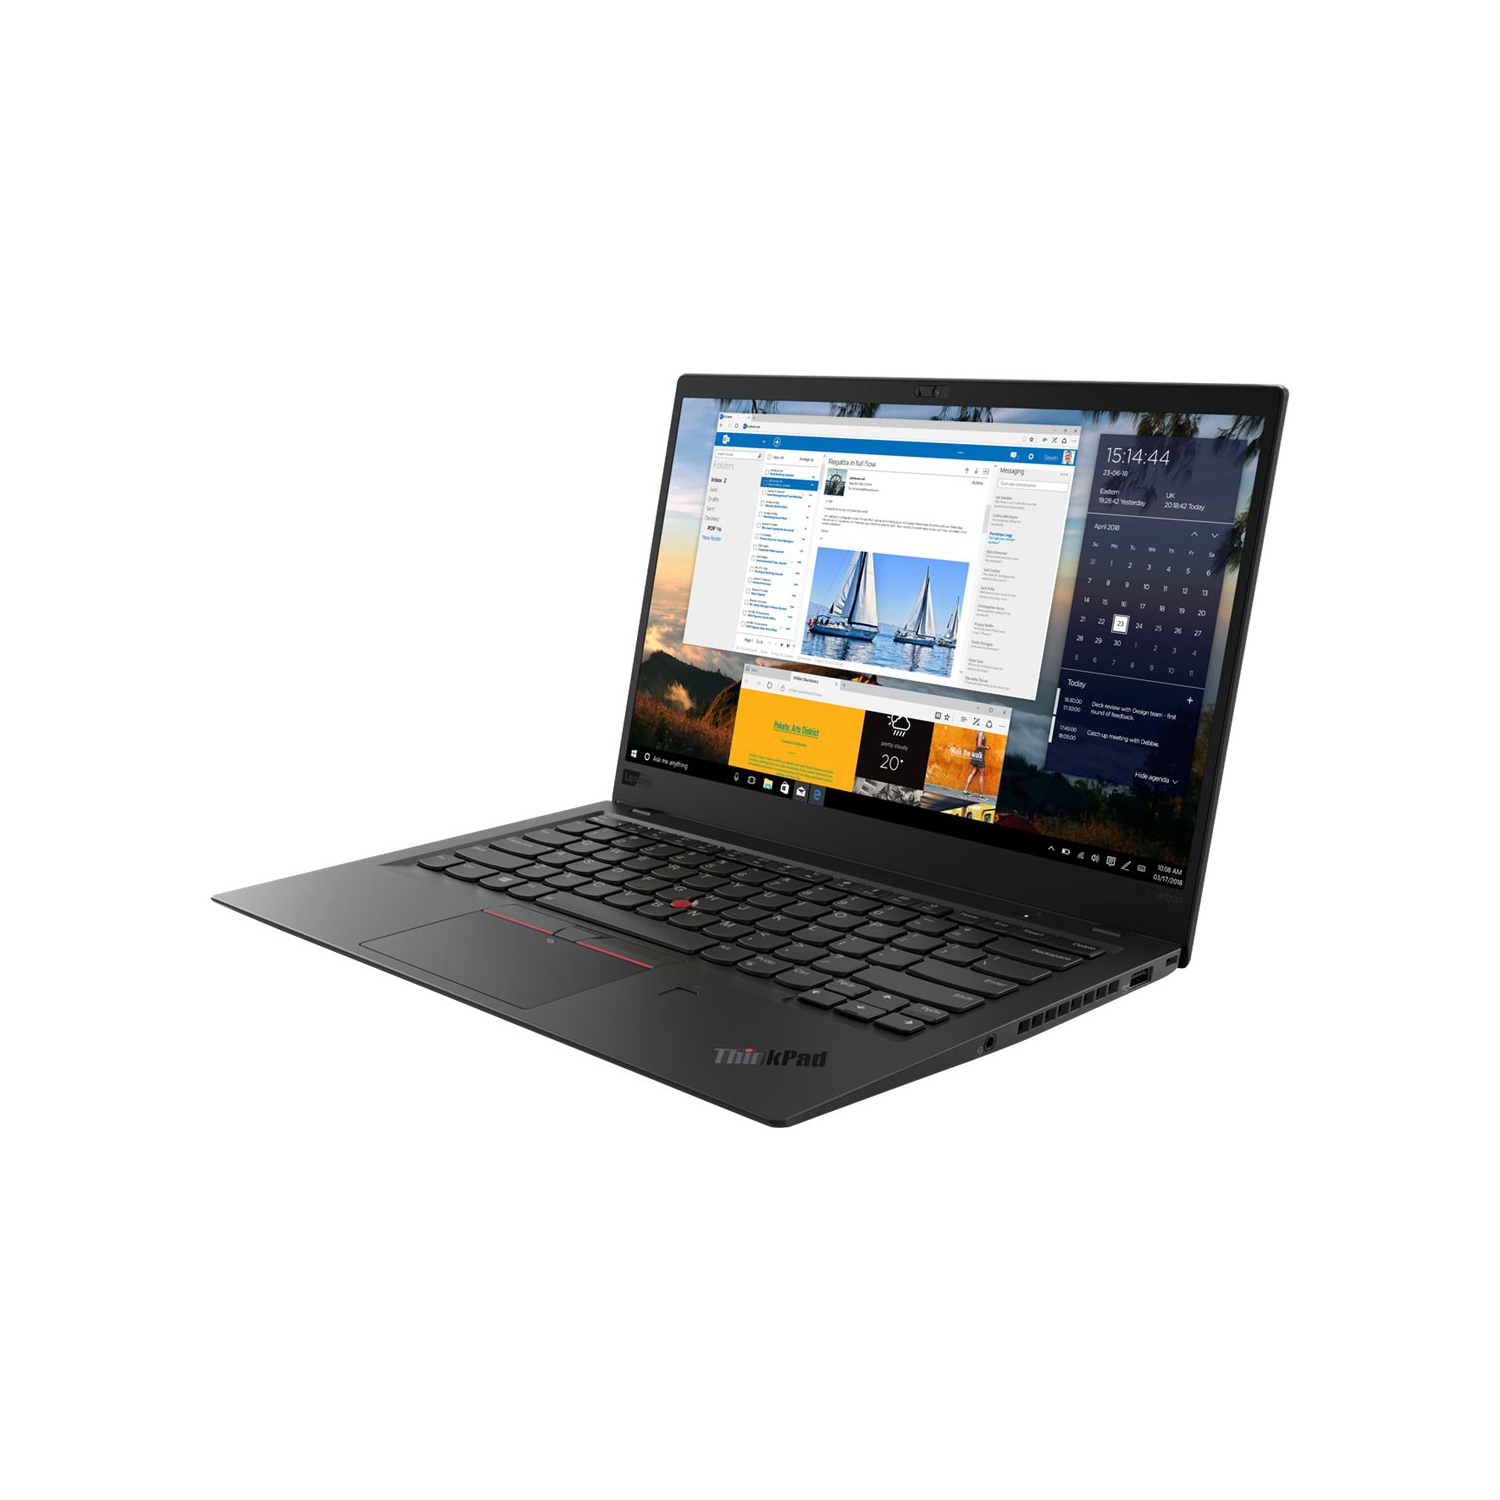 Refurbished (Good )-Lenovo Thinkpad X1 Carbon G7 TOUCH SCREEN 14",Core i7-8650U, 16 GB, 1 TB SSD, Webcam, Windows 10 Pro and 11 pro ready . Very Good Condition